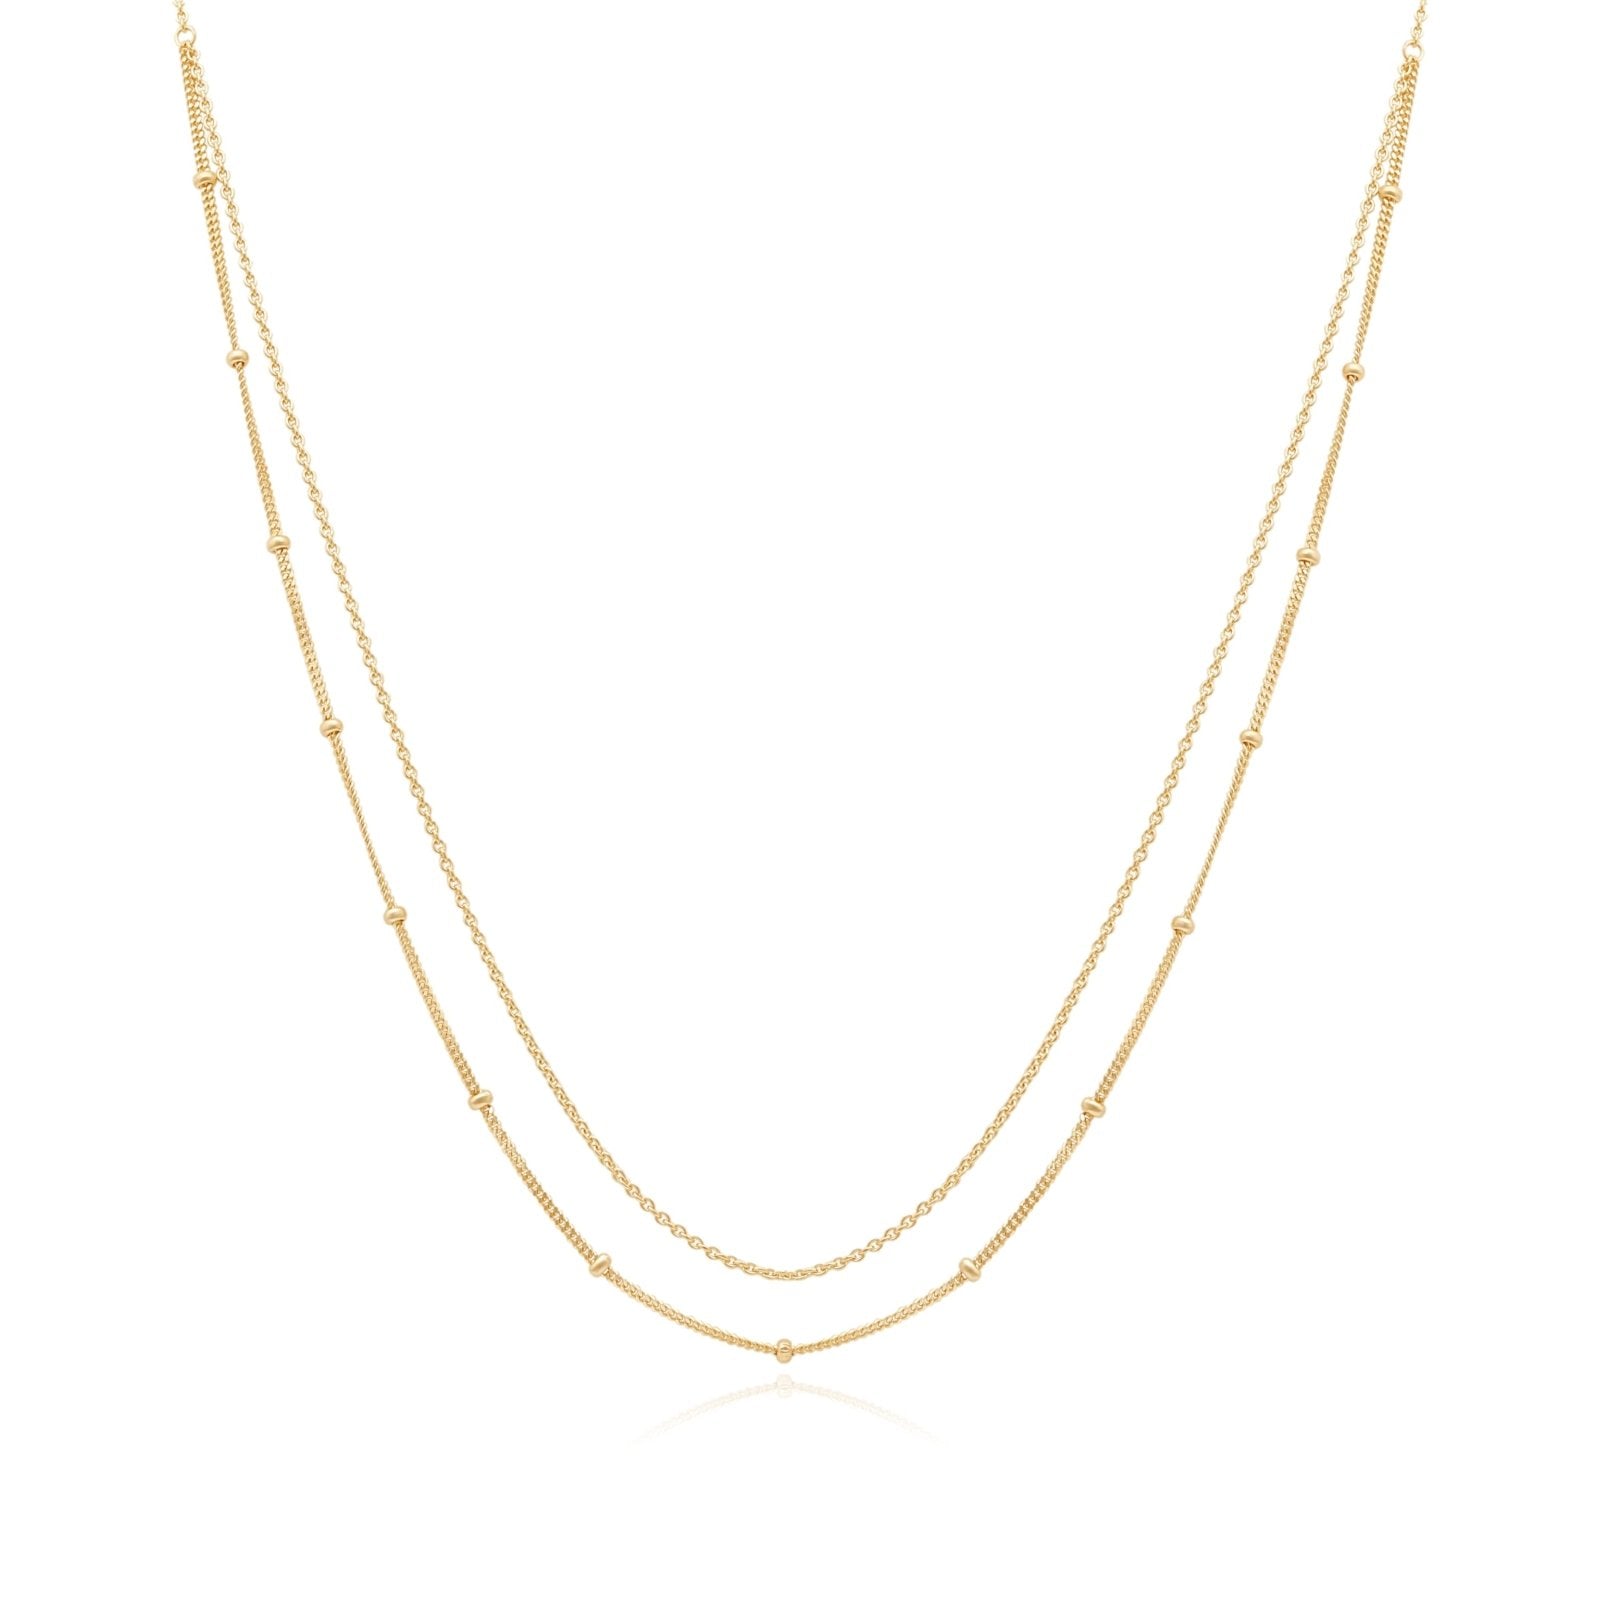 Beaded And Cuban Double Layer Chain Necklace Necklaces Estella Collection #product_description# 14k Layering Necklace Ready to Ship #tag4# #tag5# #tag6# #tag7# #tag8# #tag9# #tag10#